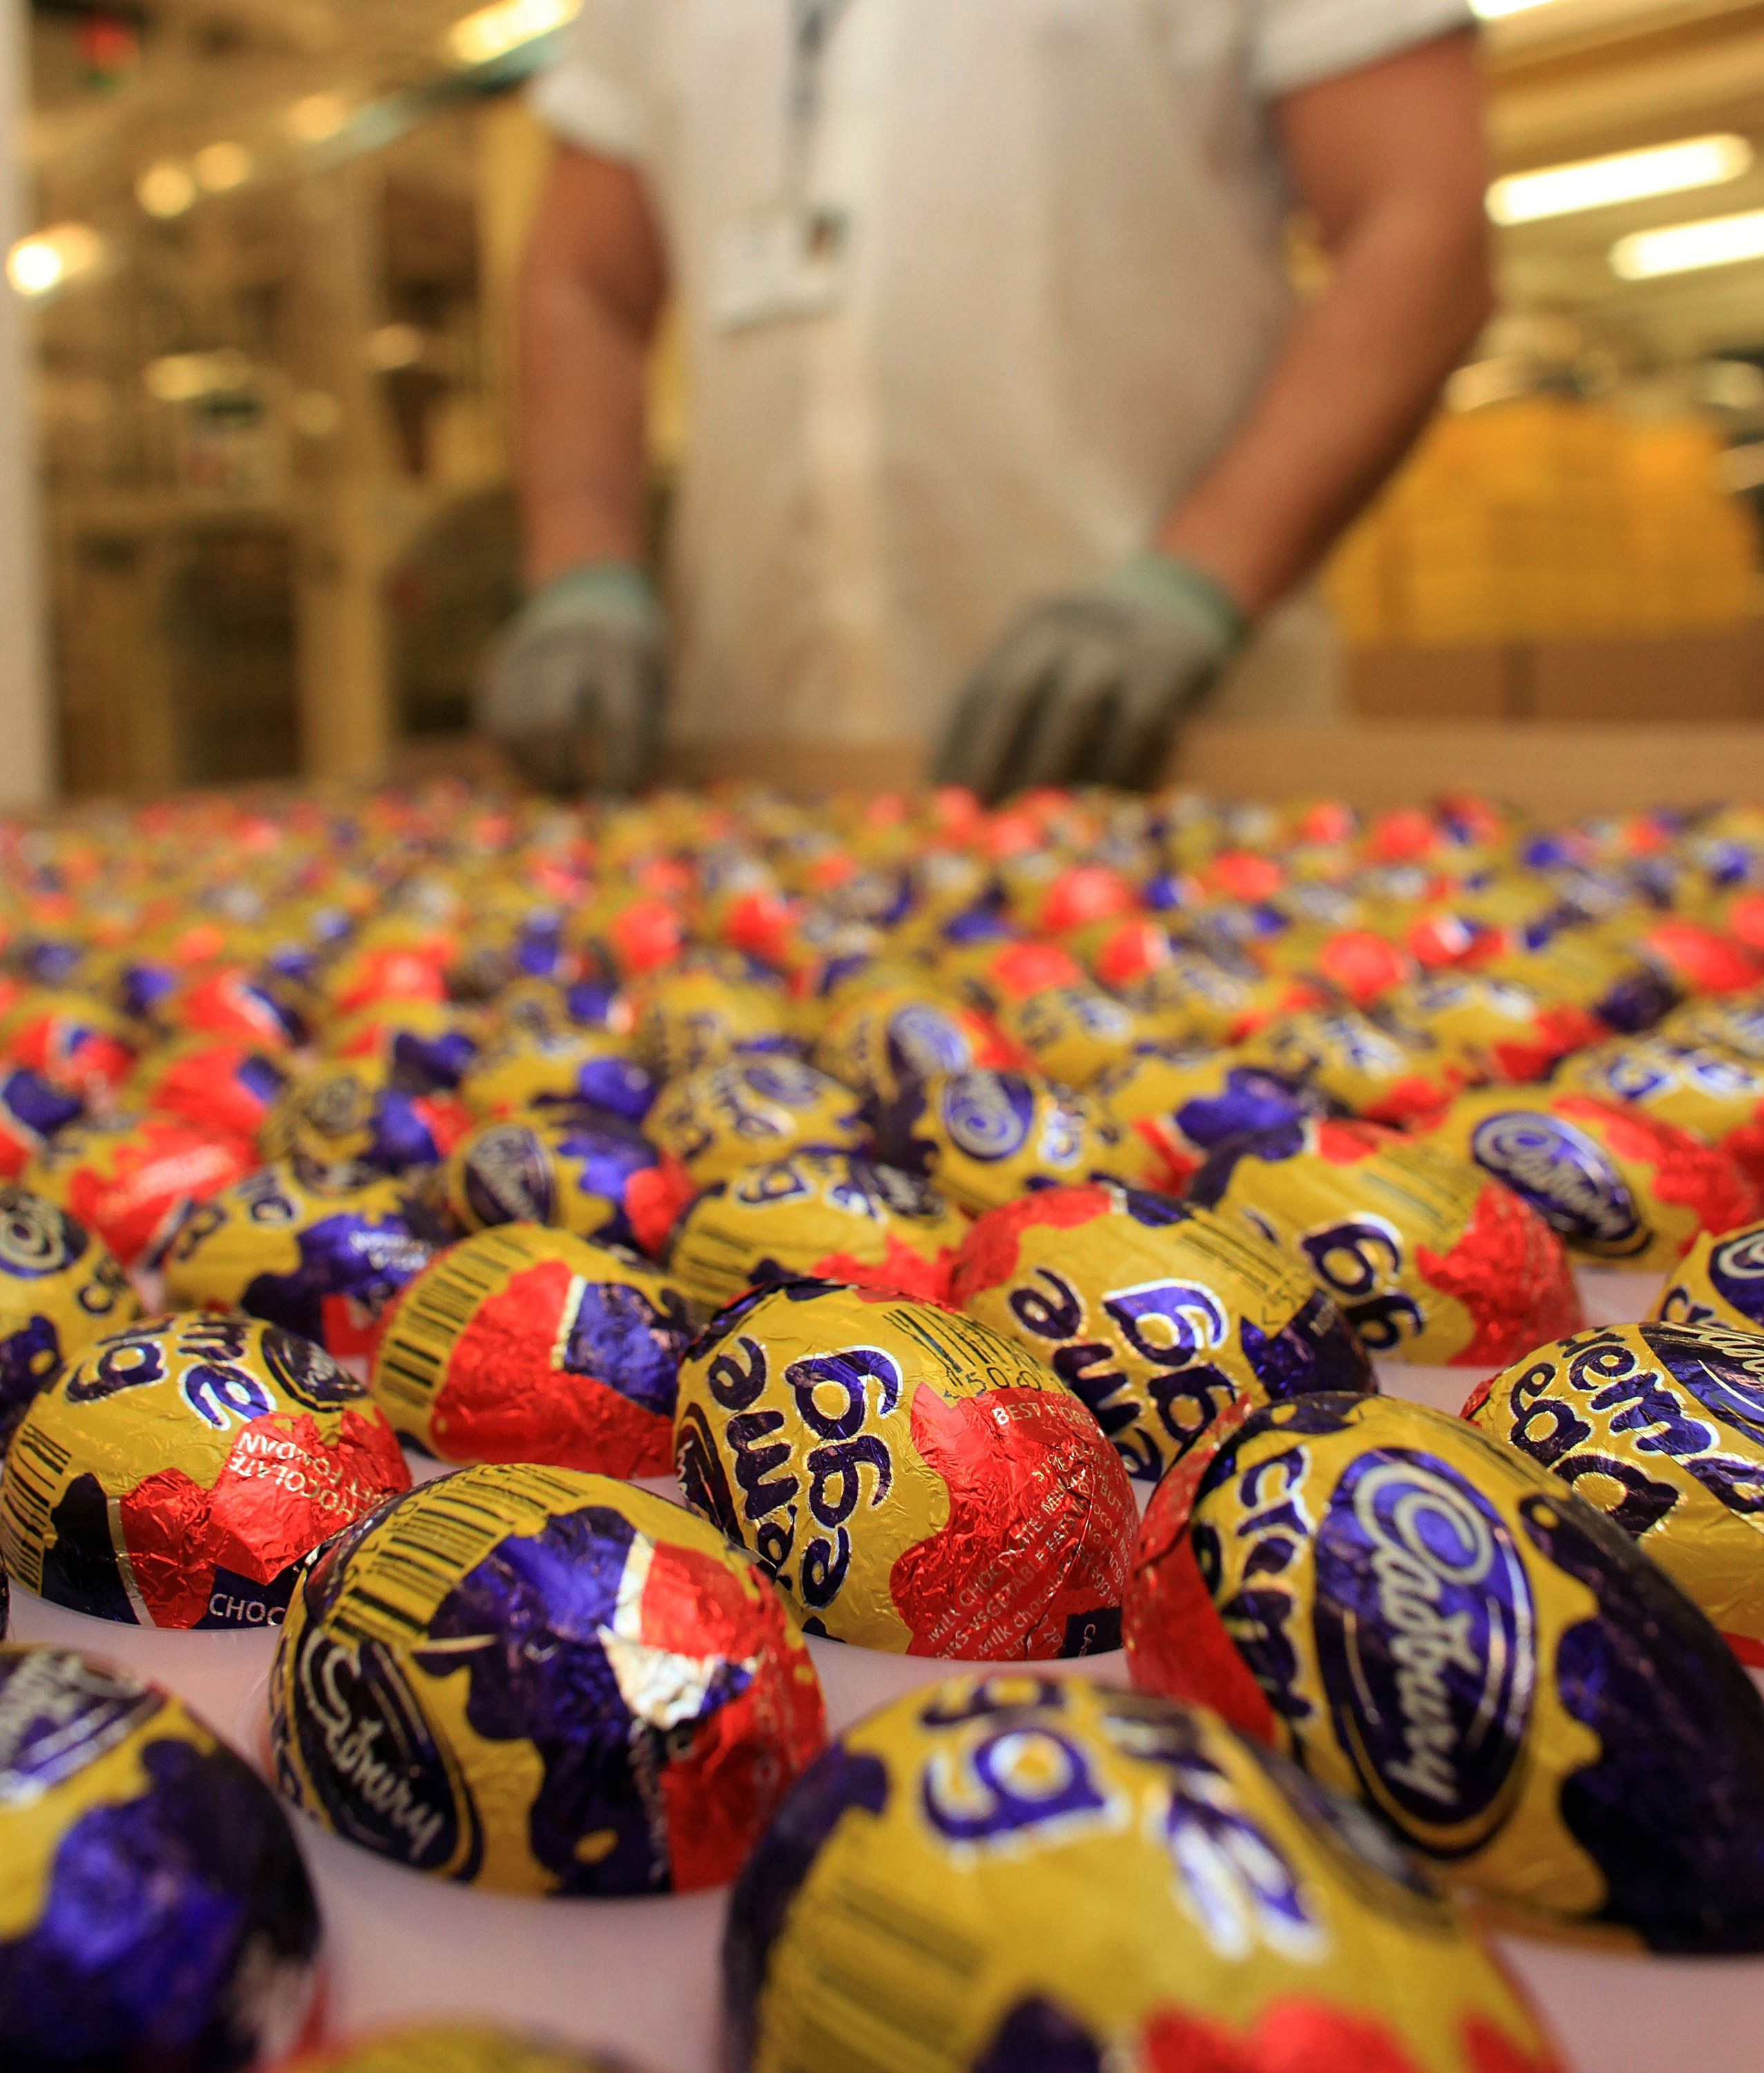 Cadbury's Creme Eggs move down the production line at the Cadbury's Bournville production plant (Christopher Furlong&mdash;Getty Images)